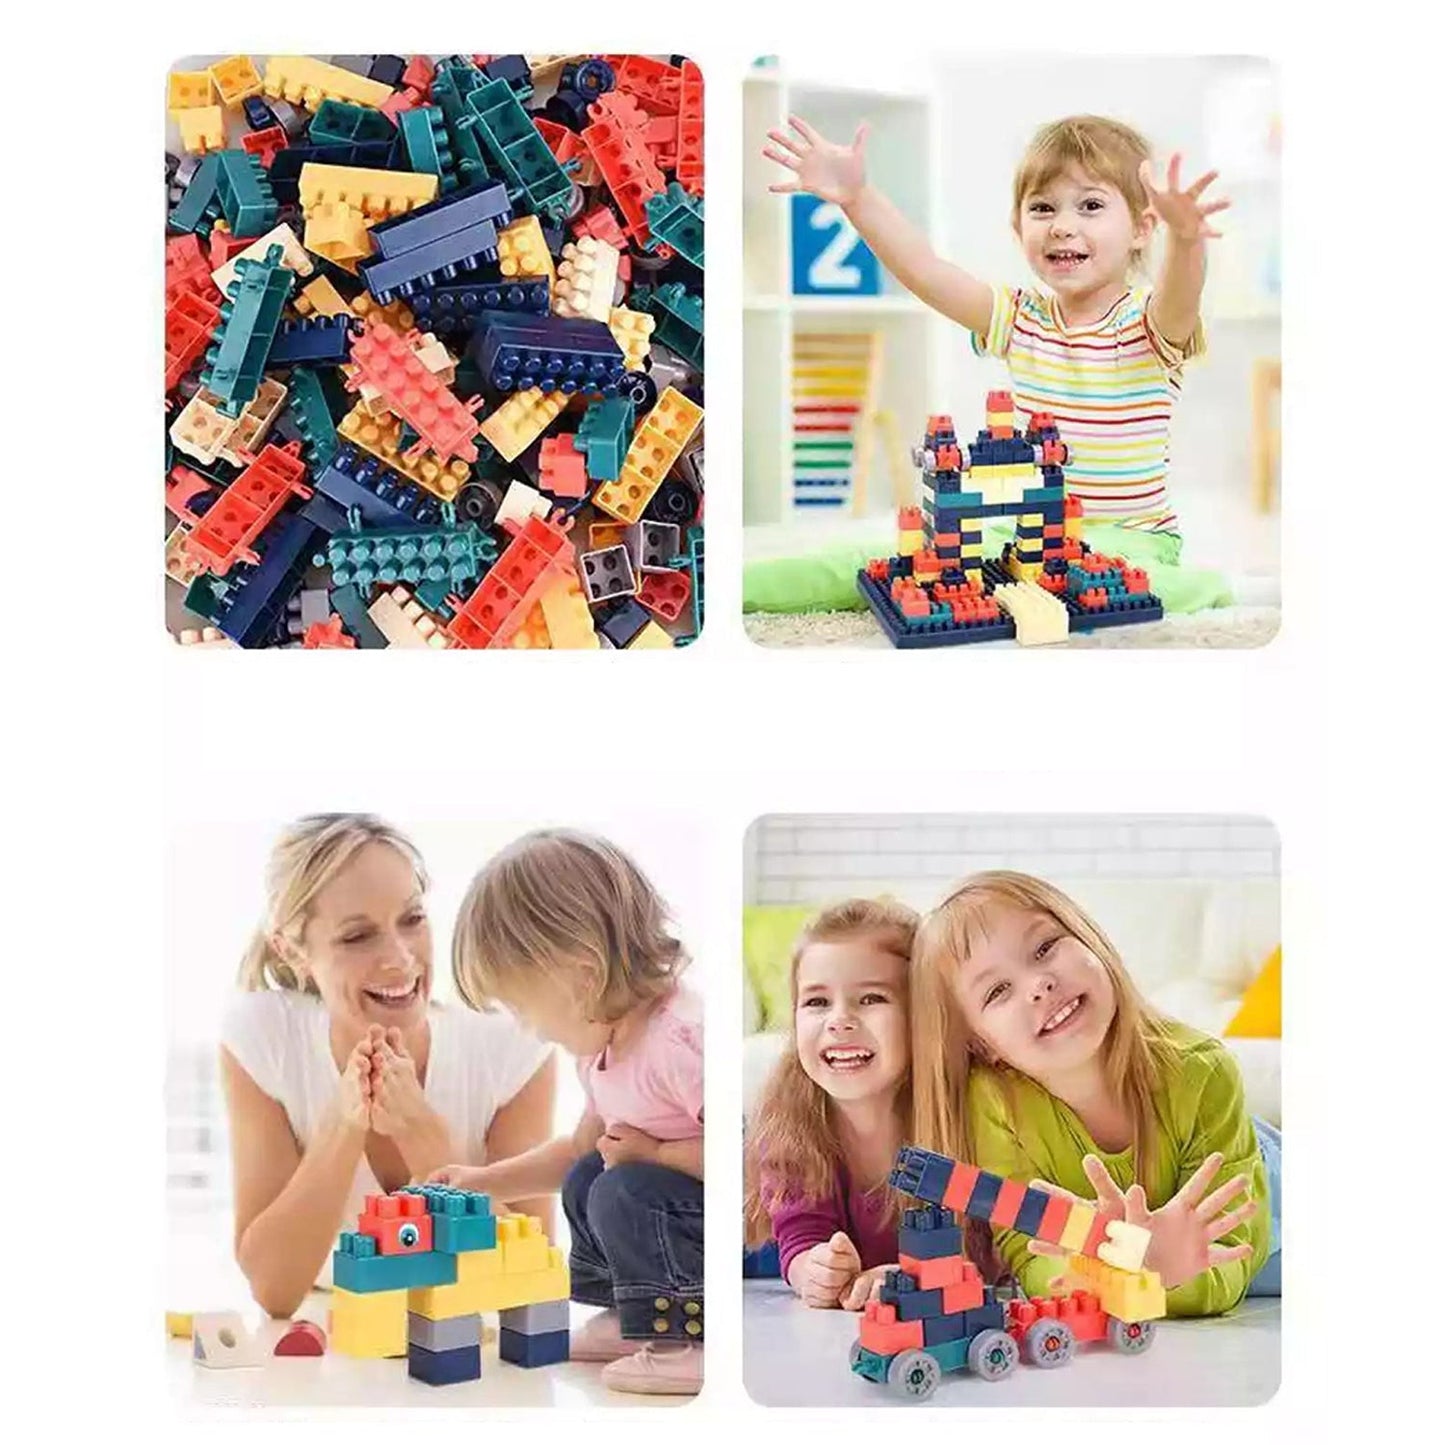 3919 100 Pc Train Candy Toy used in all kinds of household and official places specially for kids and children for their playing and enjoying purposes. DeoDap